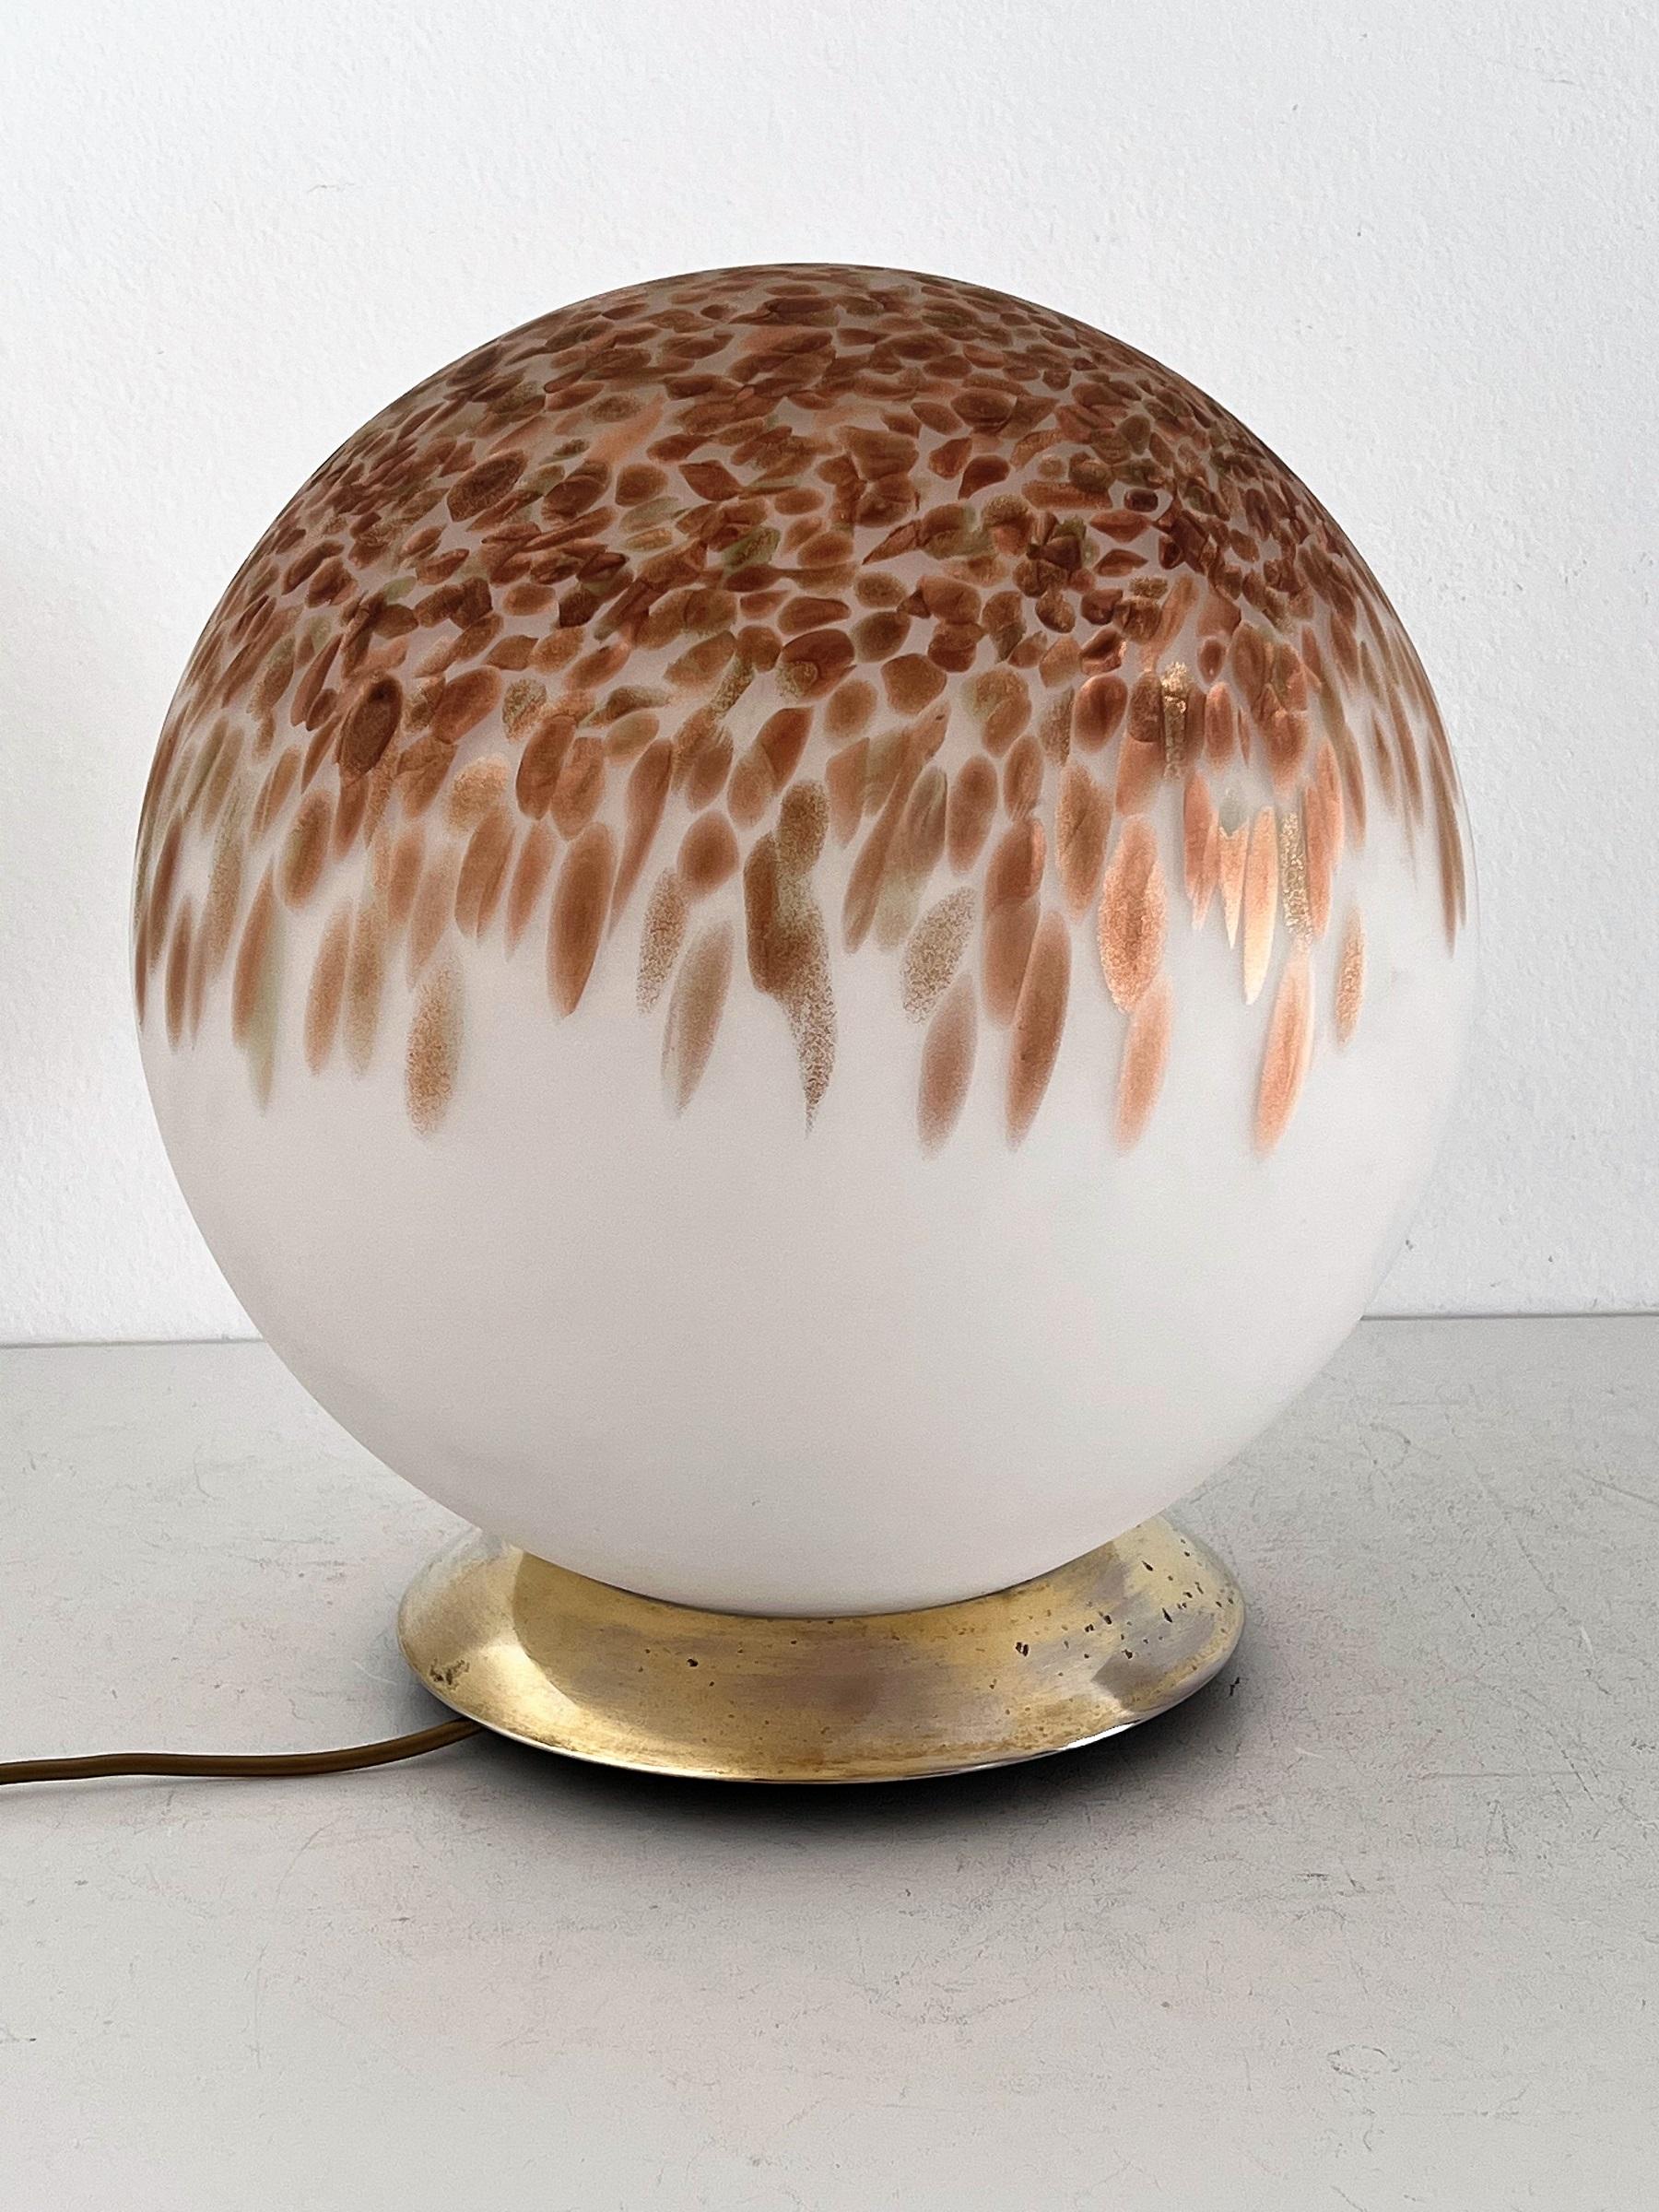 Gorgeous large size Murano glass table lamp Made in Italy in the 1970s. ca.
The table lamps glass ball is made of frosted Murano glass and copper-coloured murrine melted into the glass.
The lamp is beautiful to look at when switched off, but